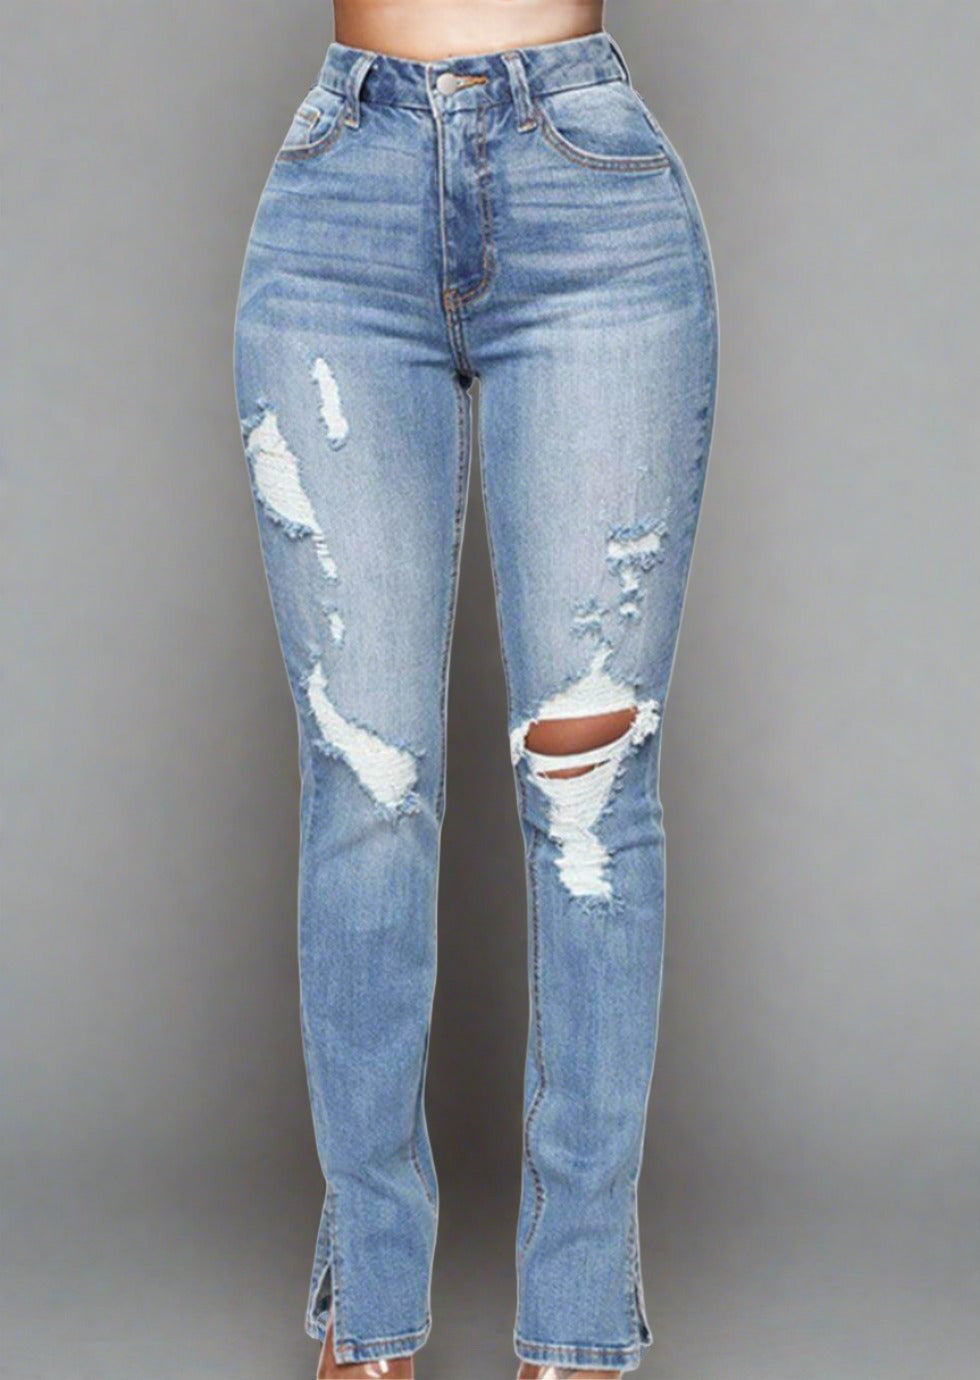 Chic Distressed High Waist Jeans - Trendociti